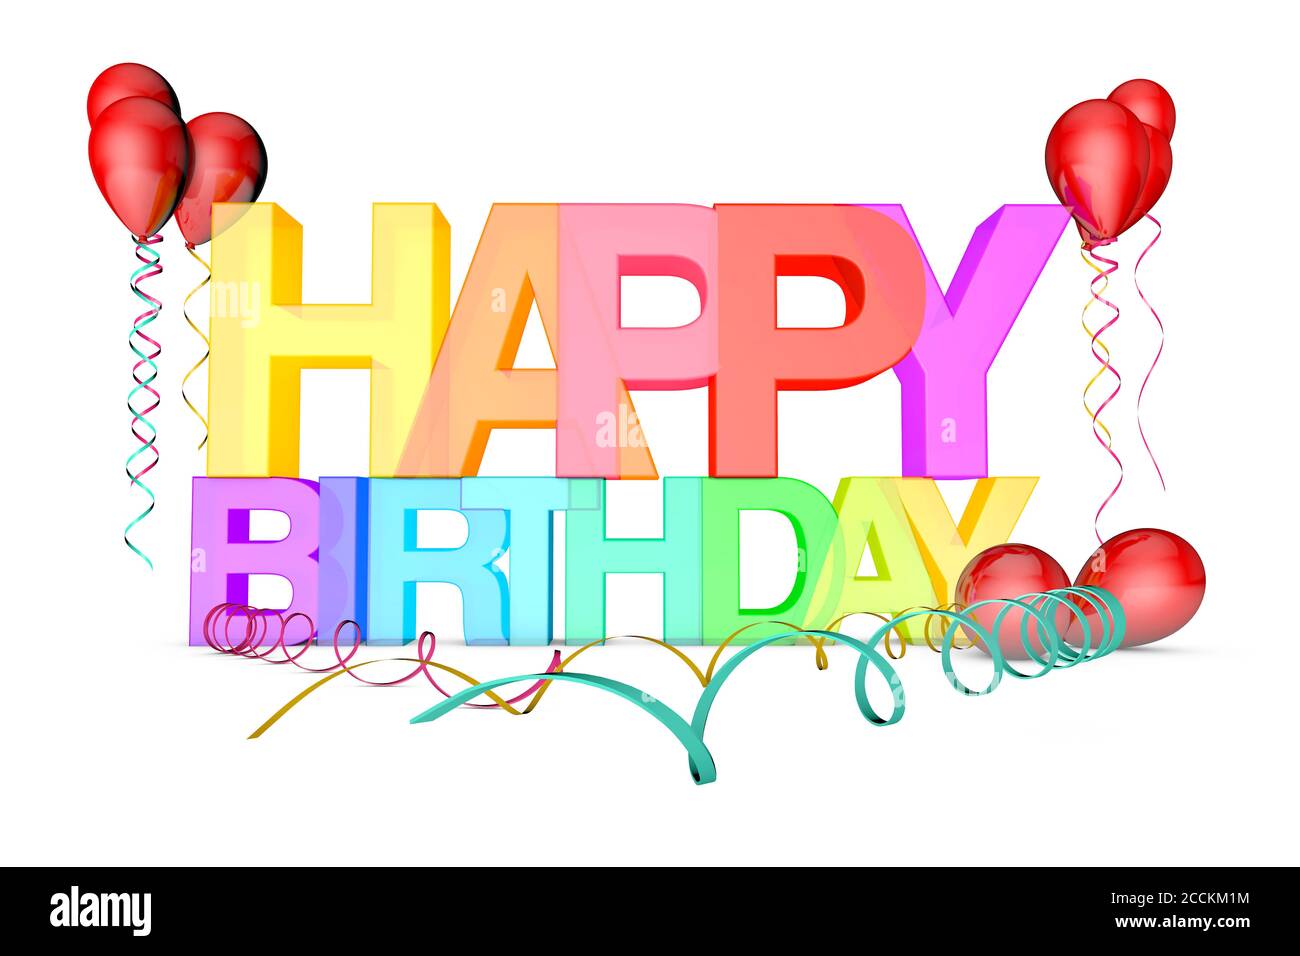 3d illustration render concept of a happy birthday message on a white background Stock Photo